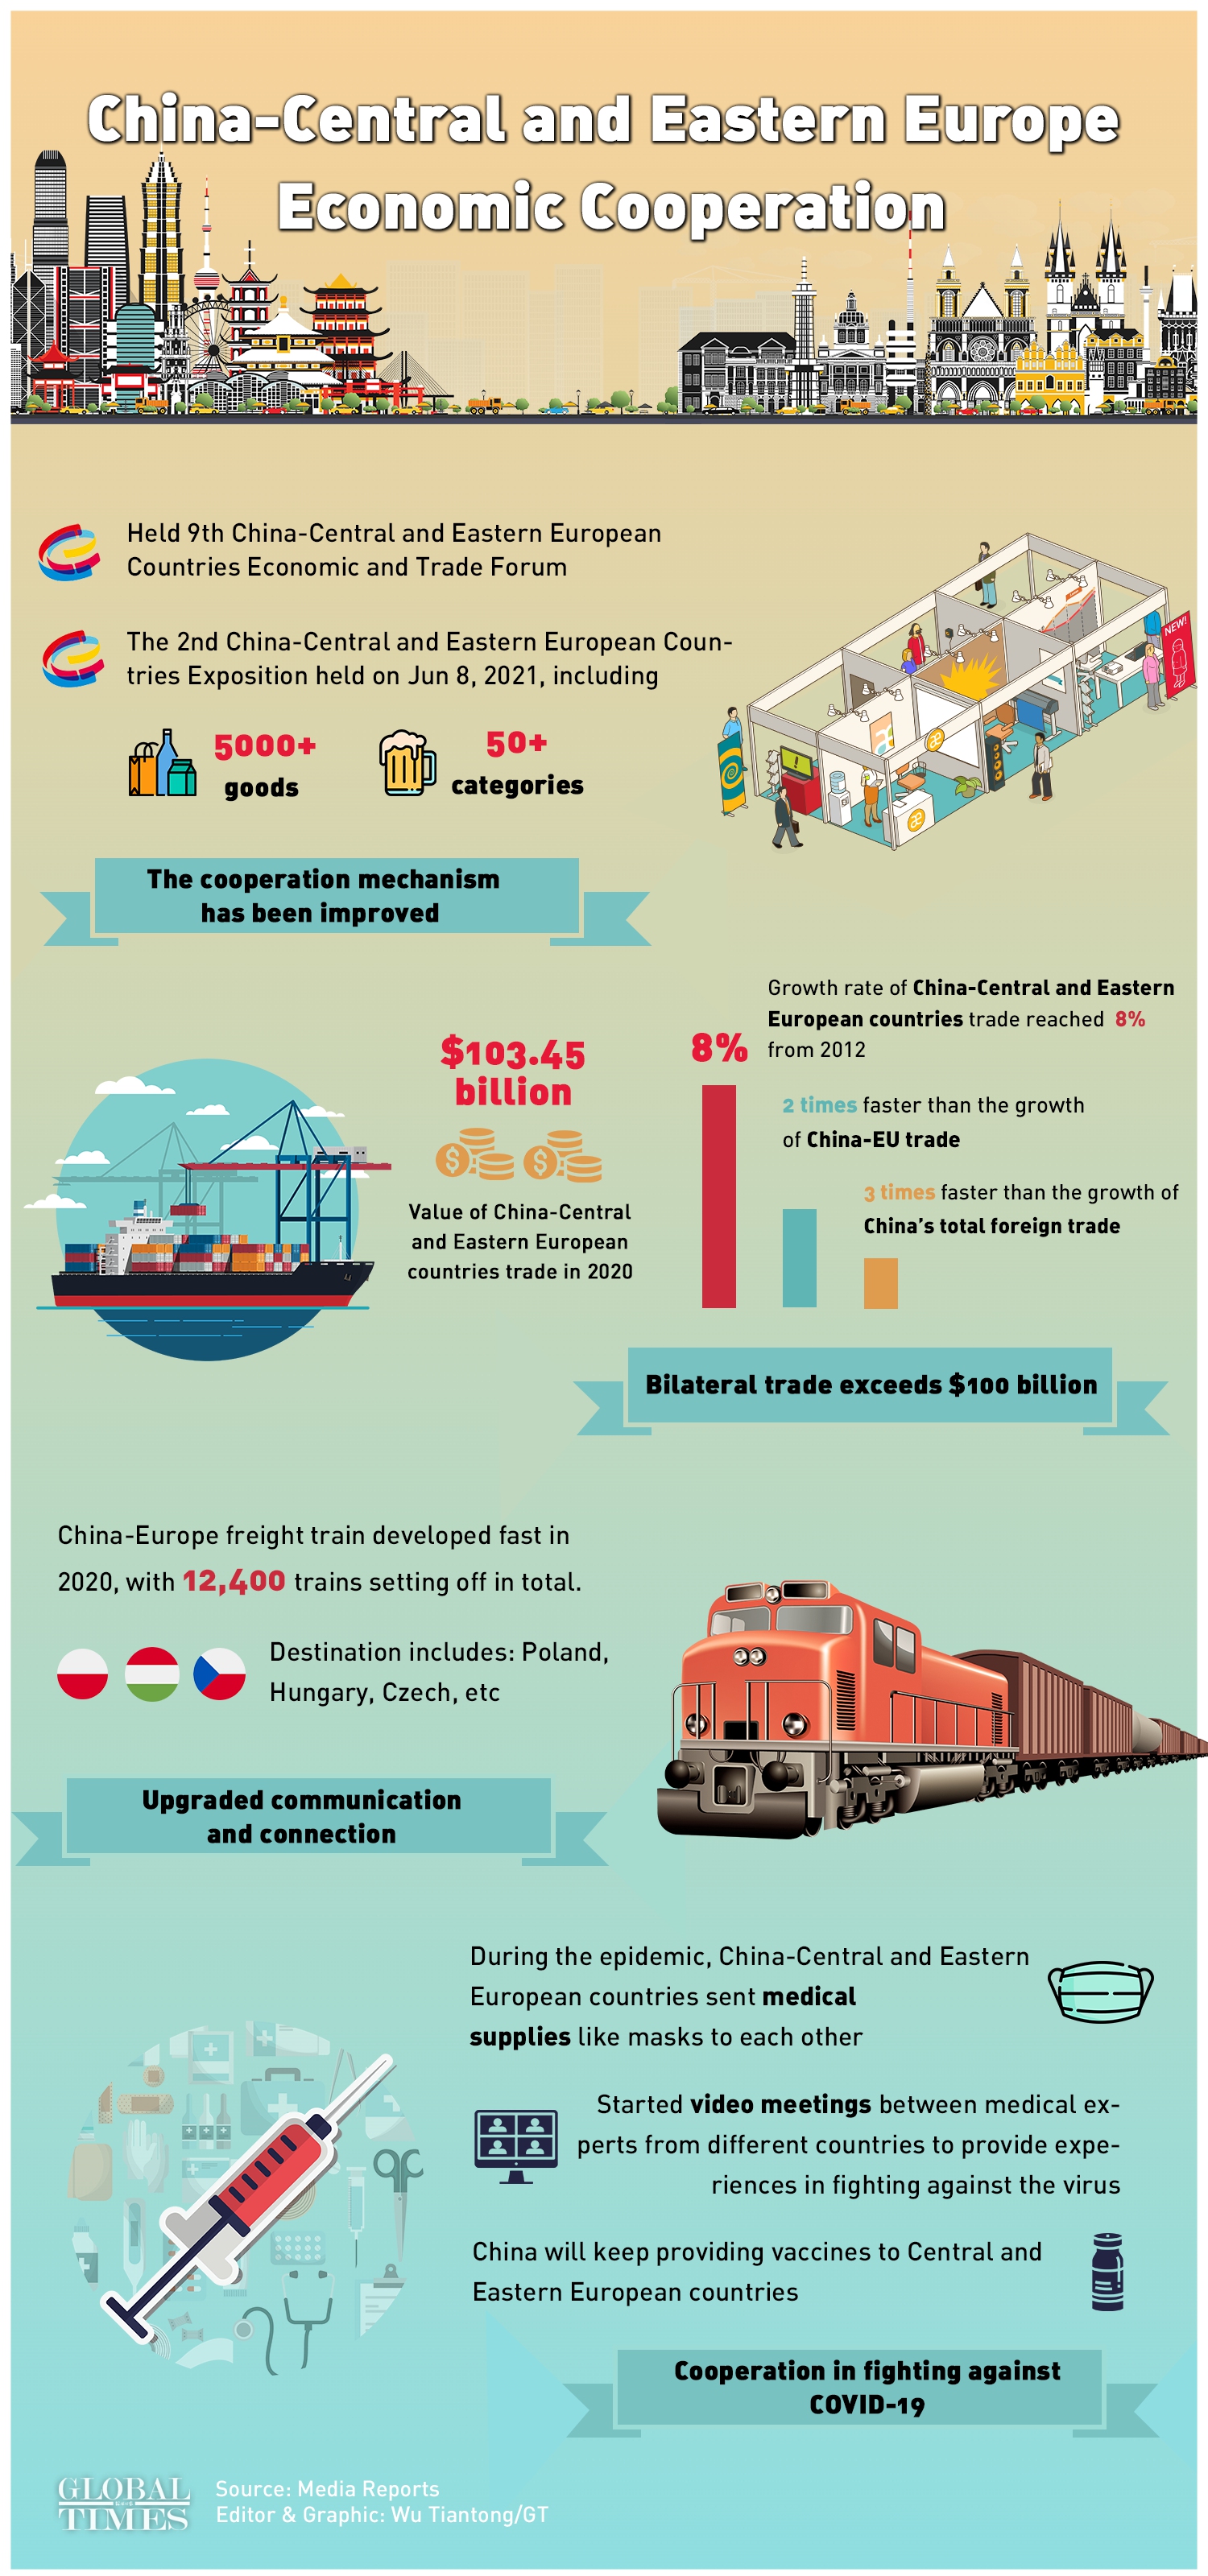 China-Central and Eastern Europe Economic Cooperation Infographic: Wu Tiantong/GT